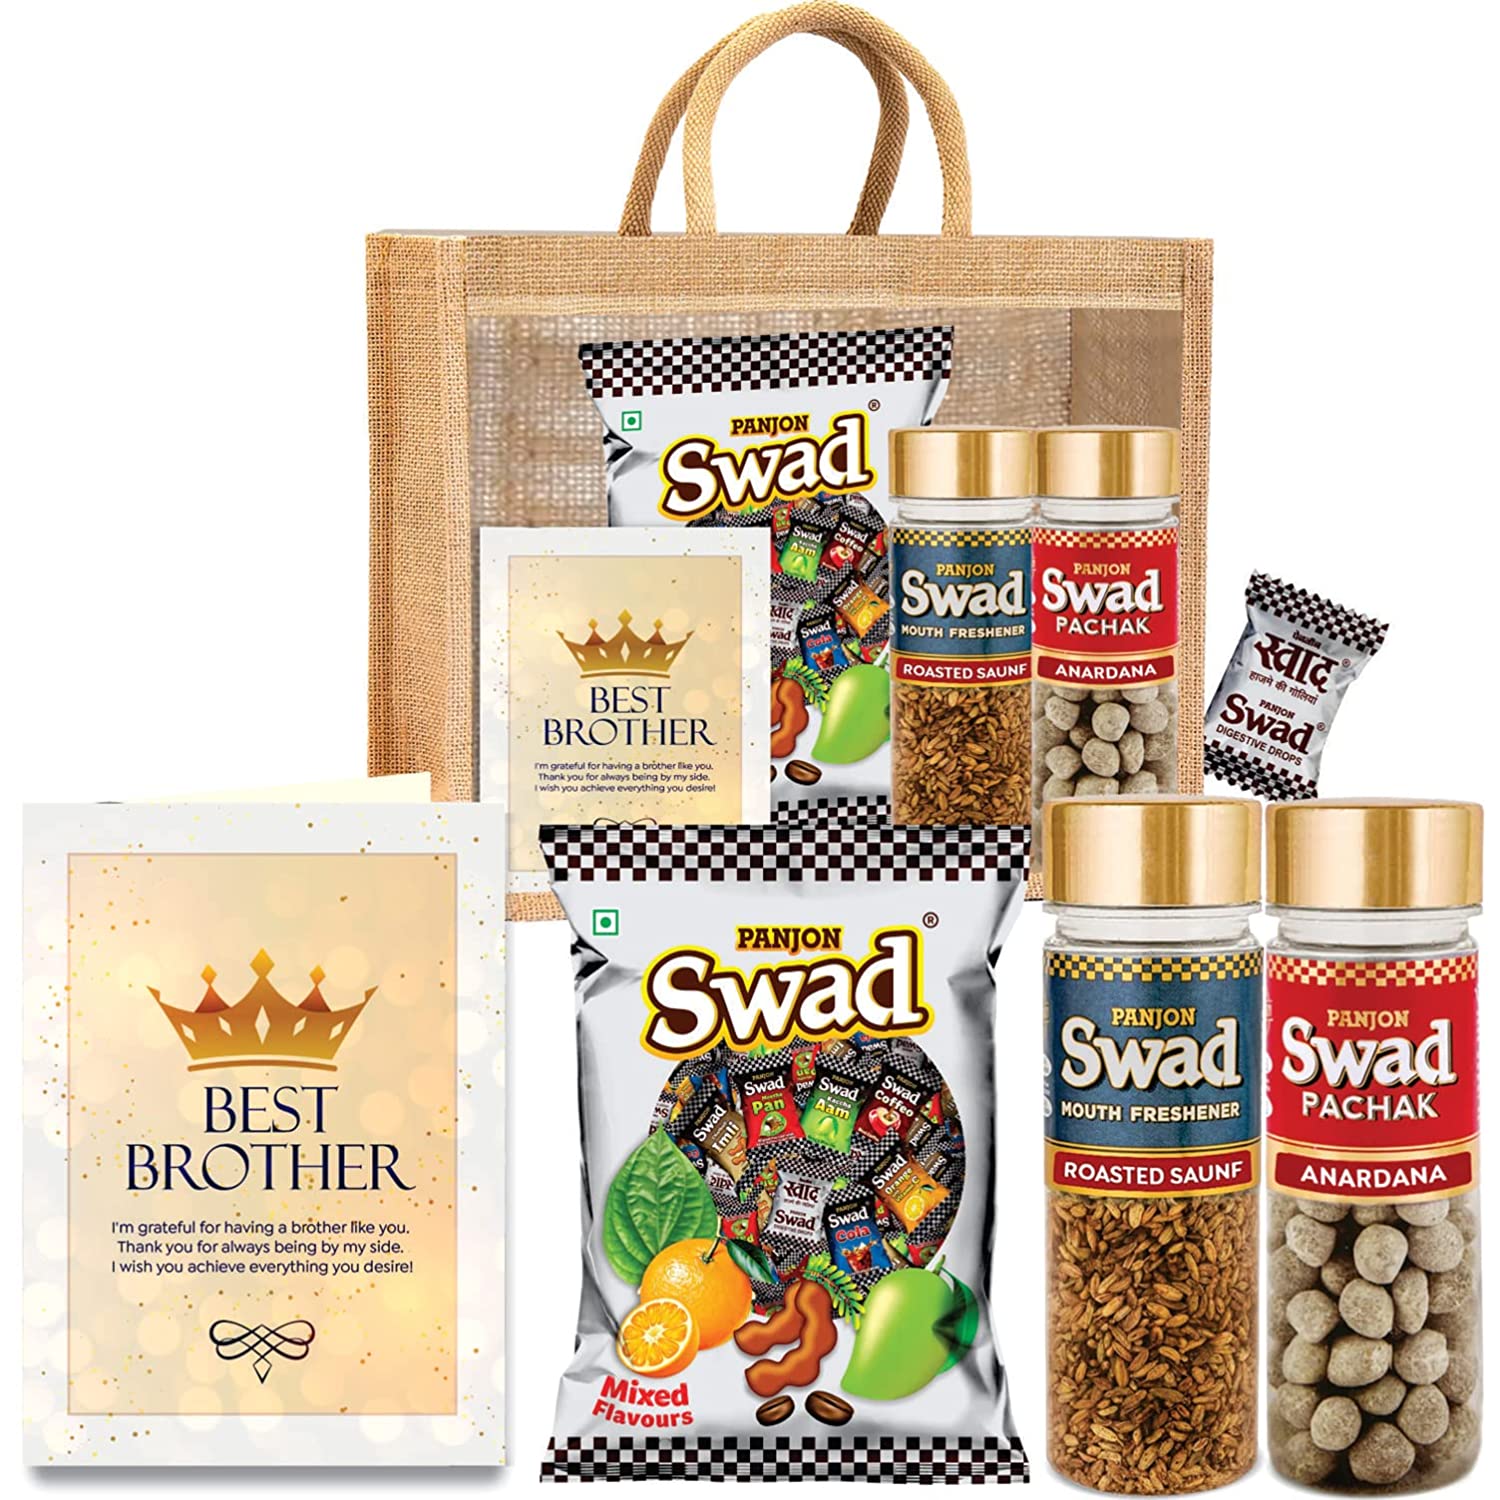 Swad World’s Best Brother Gift Hamper Set (Mixed Toffee & Rosted Saunf & Anardana Pachak Mukhwas Mouthfreshener, 25 Candy & 2 bottle) with Greeting Card & Jute Bag,Gift Item